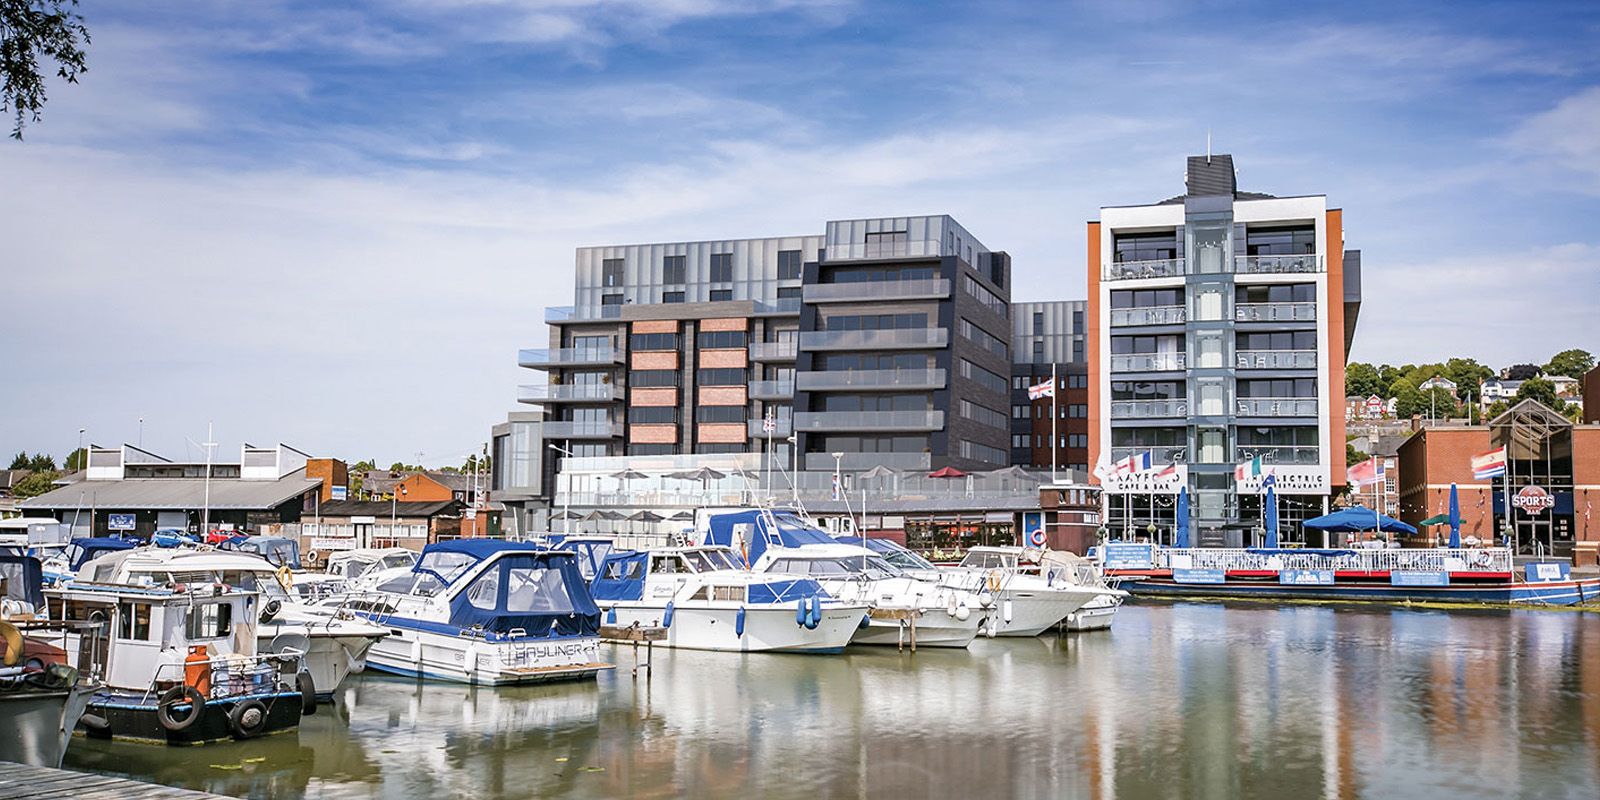 One the Brayford, Lincoln